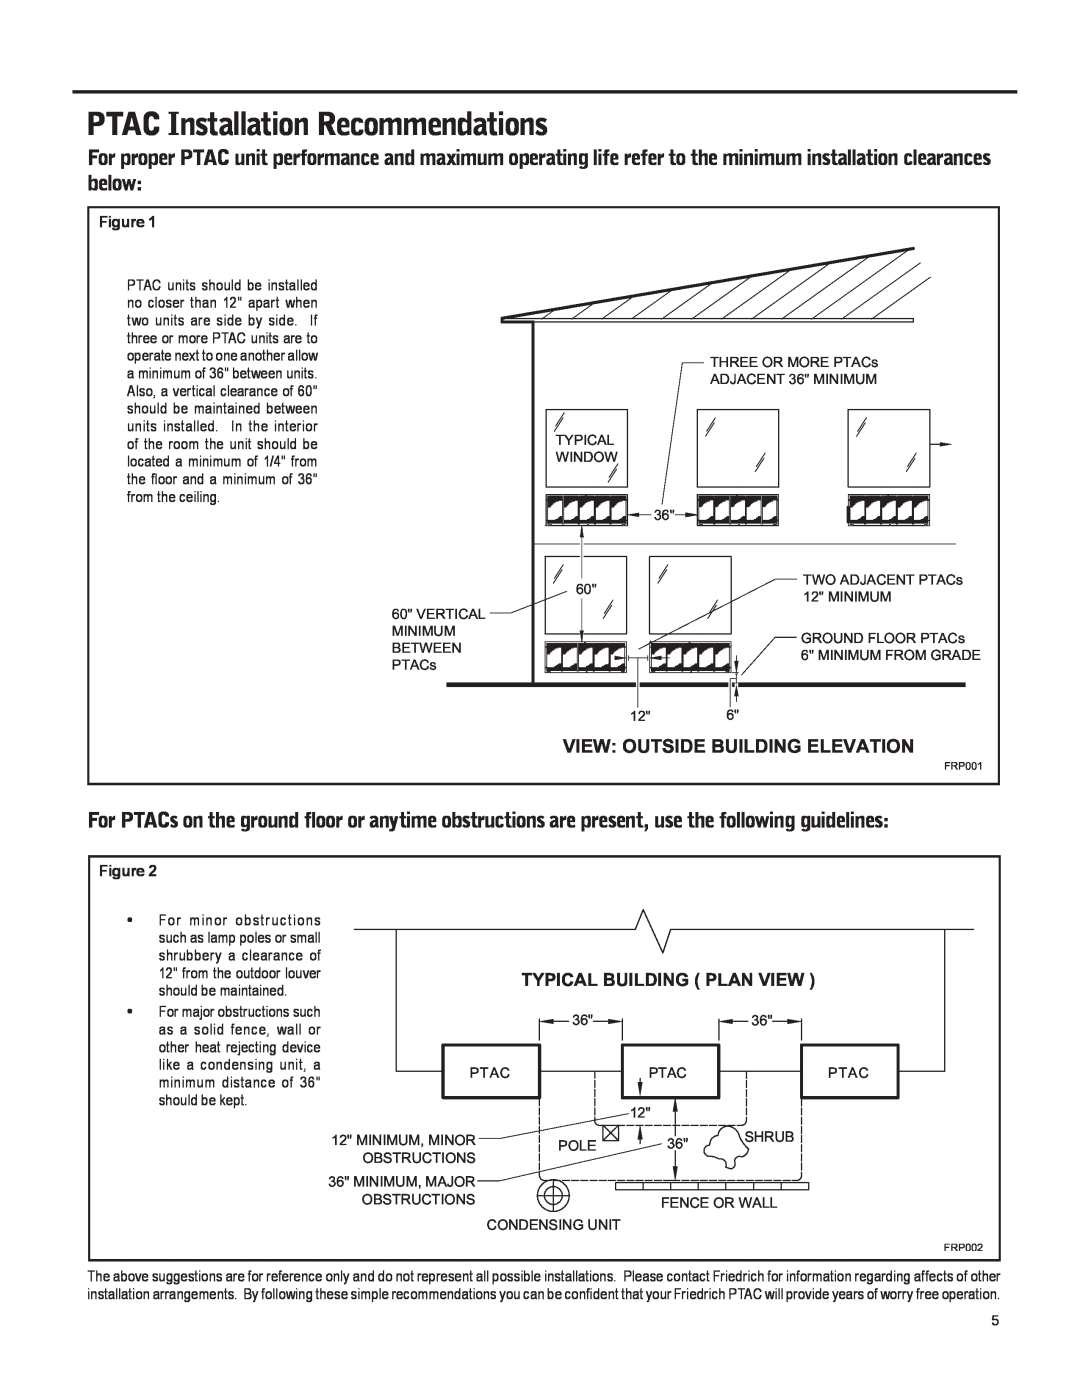 Friedrich 920-087-09 (12/10) operation manual PTAC Installation Recommendations, View Outside Building Elevation 